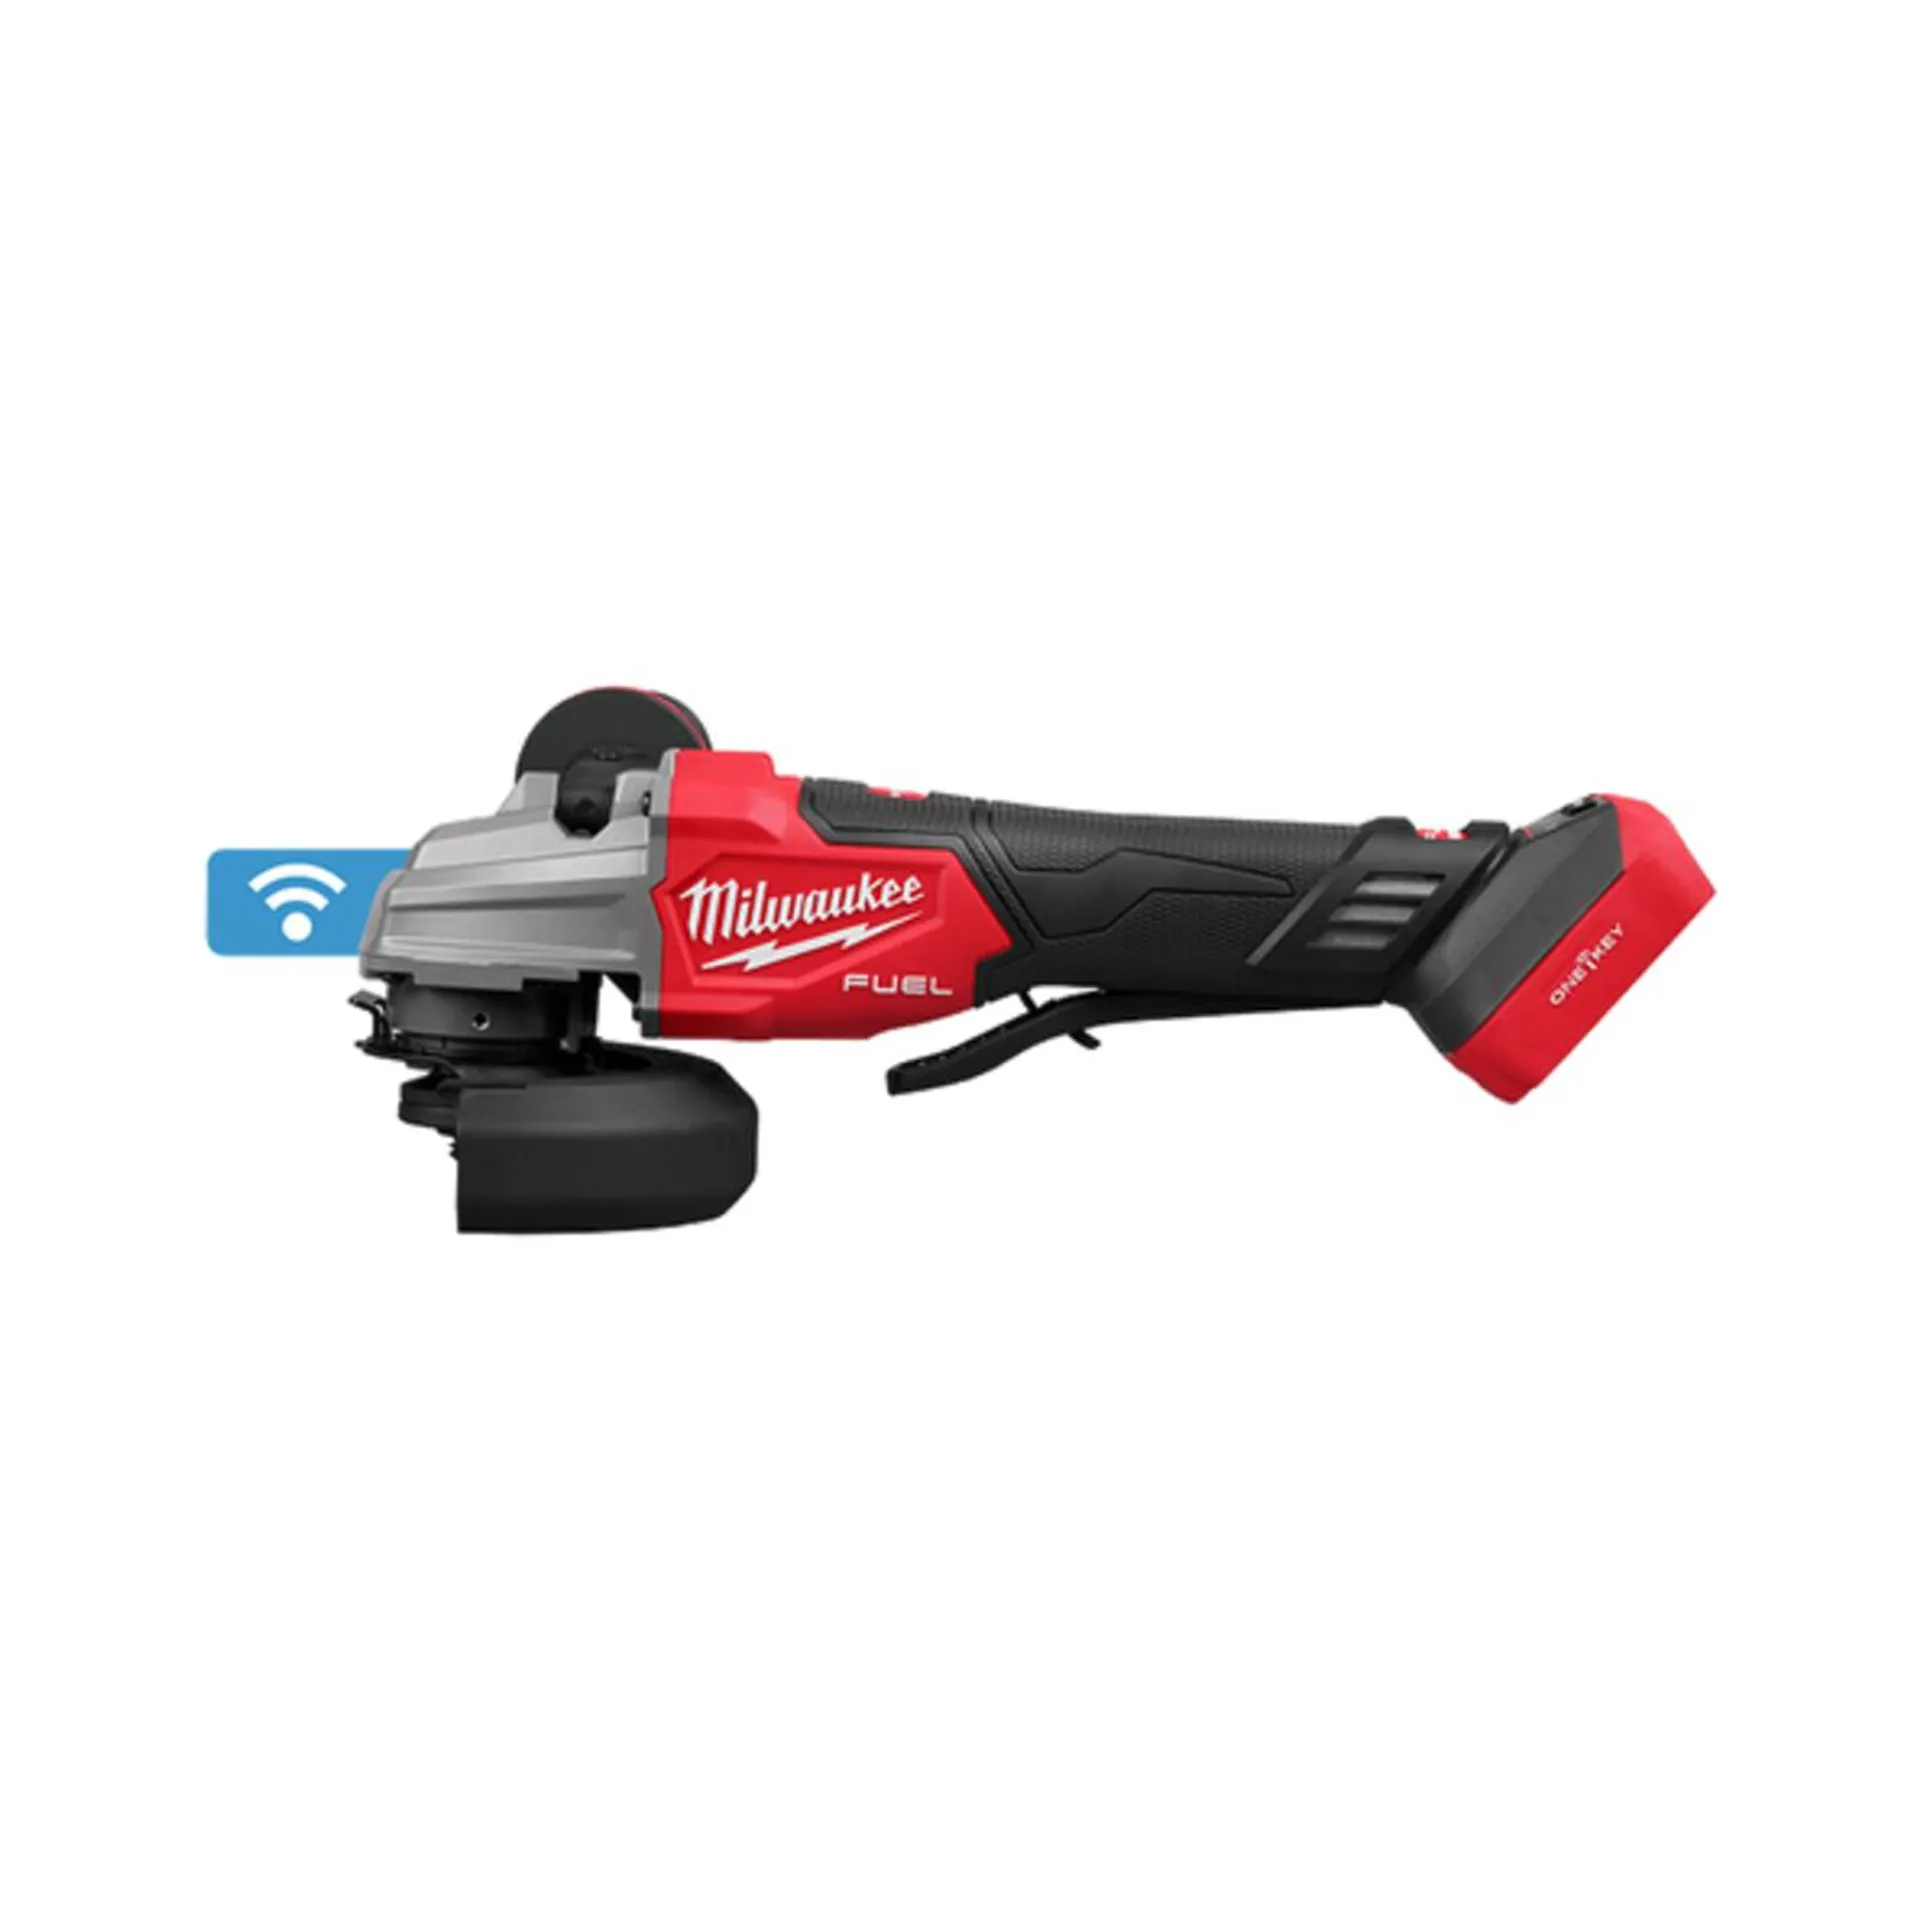 M18 FUEL 125MM (5") Dual-Trigger Braking Angle Grinder with Deadman Paddle Switch (Tool Only)